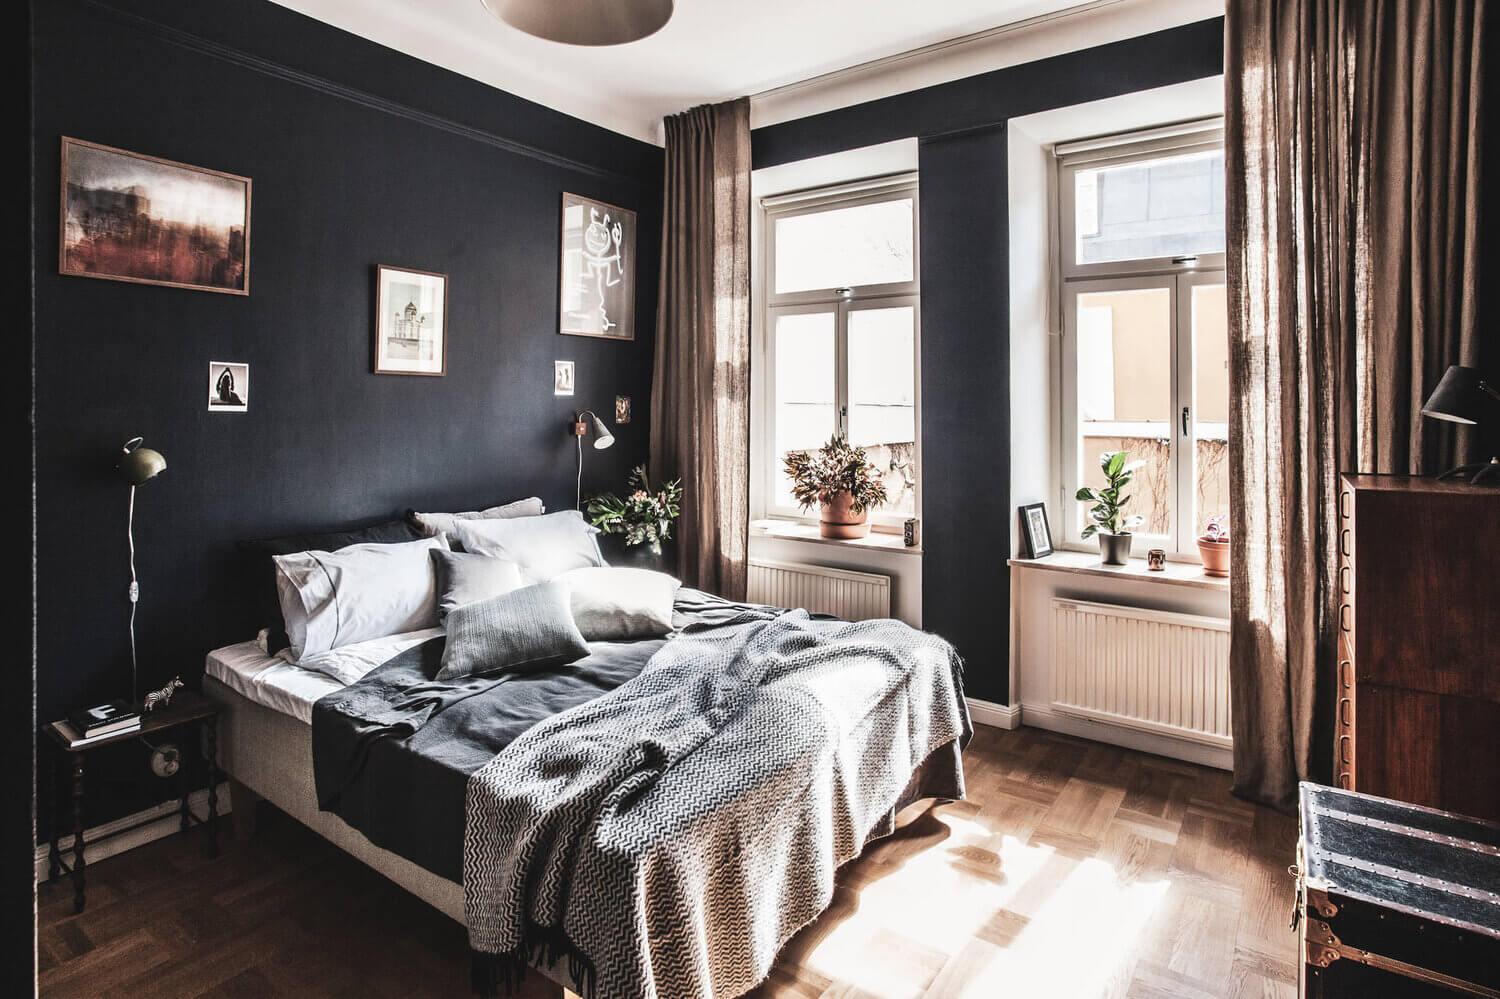 AWarmScandiApartmentwithaMoodyBedroom TheNordroom11 A Warm Scandinavian Apartment with a Moody Bedroom